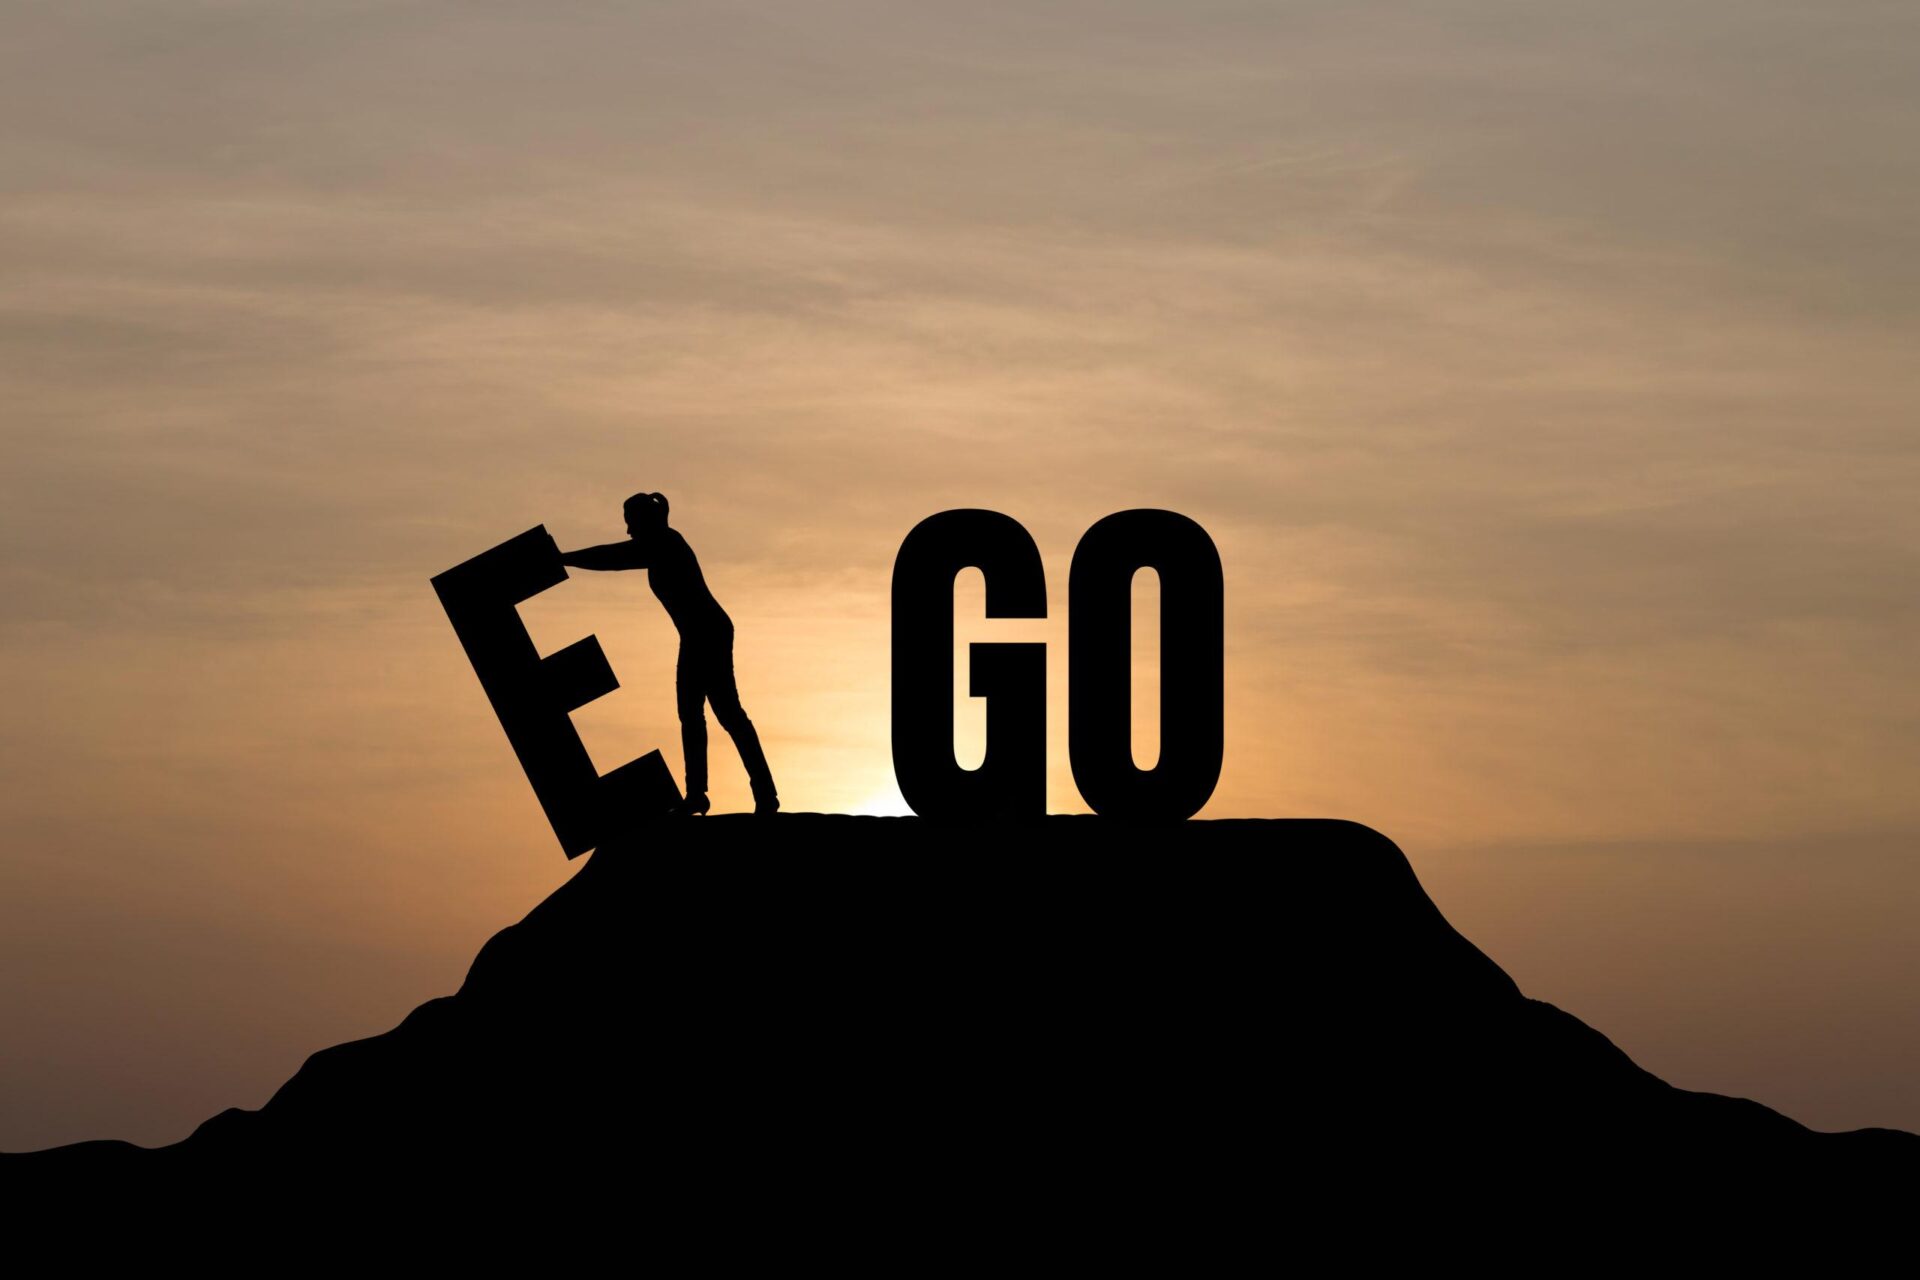 Ways to Control Your Ego